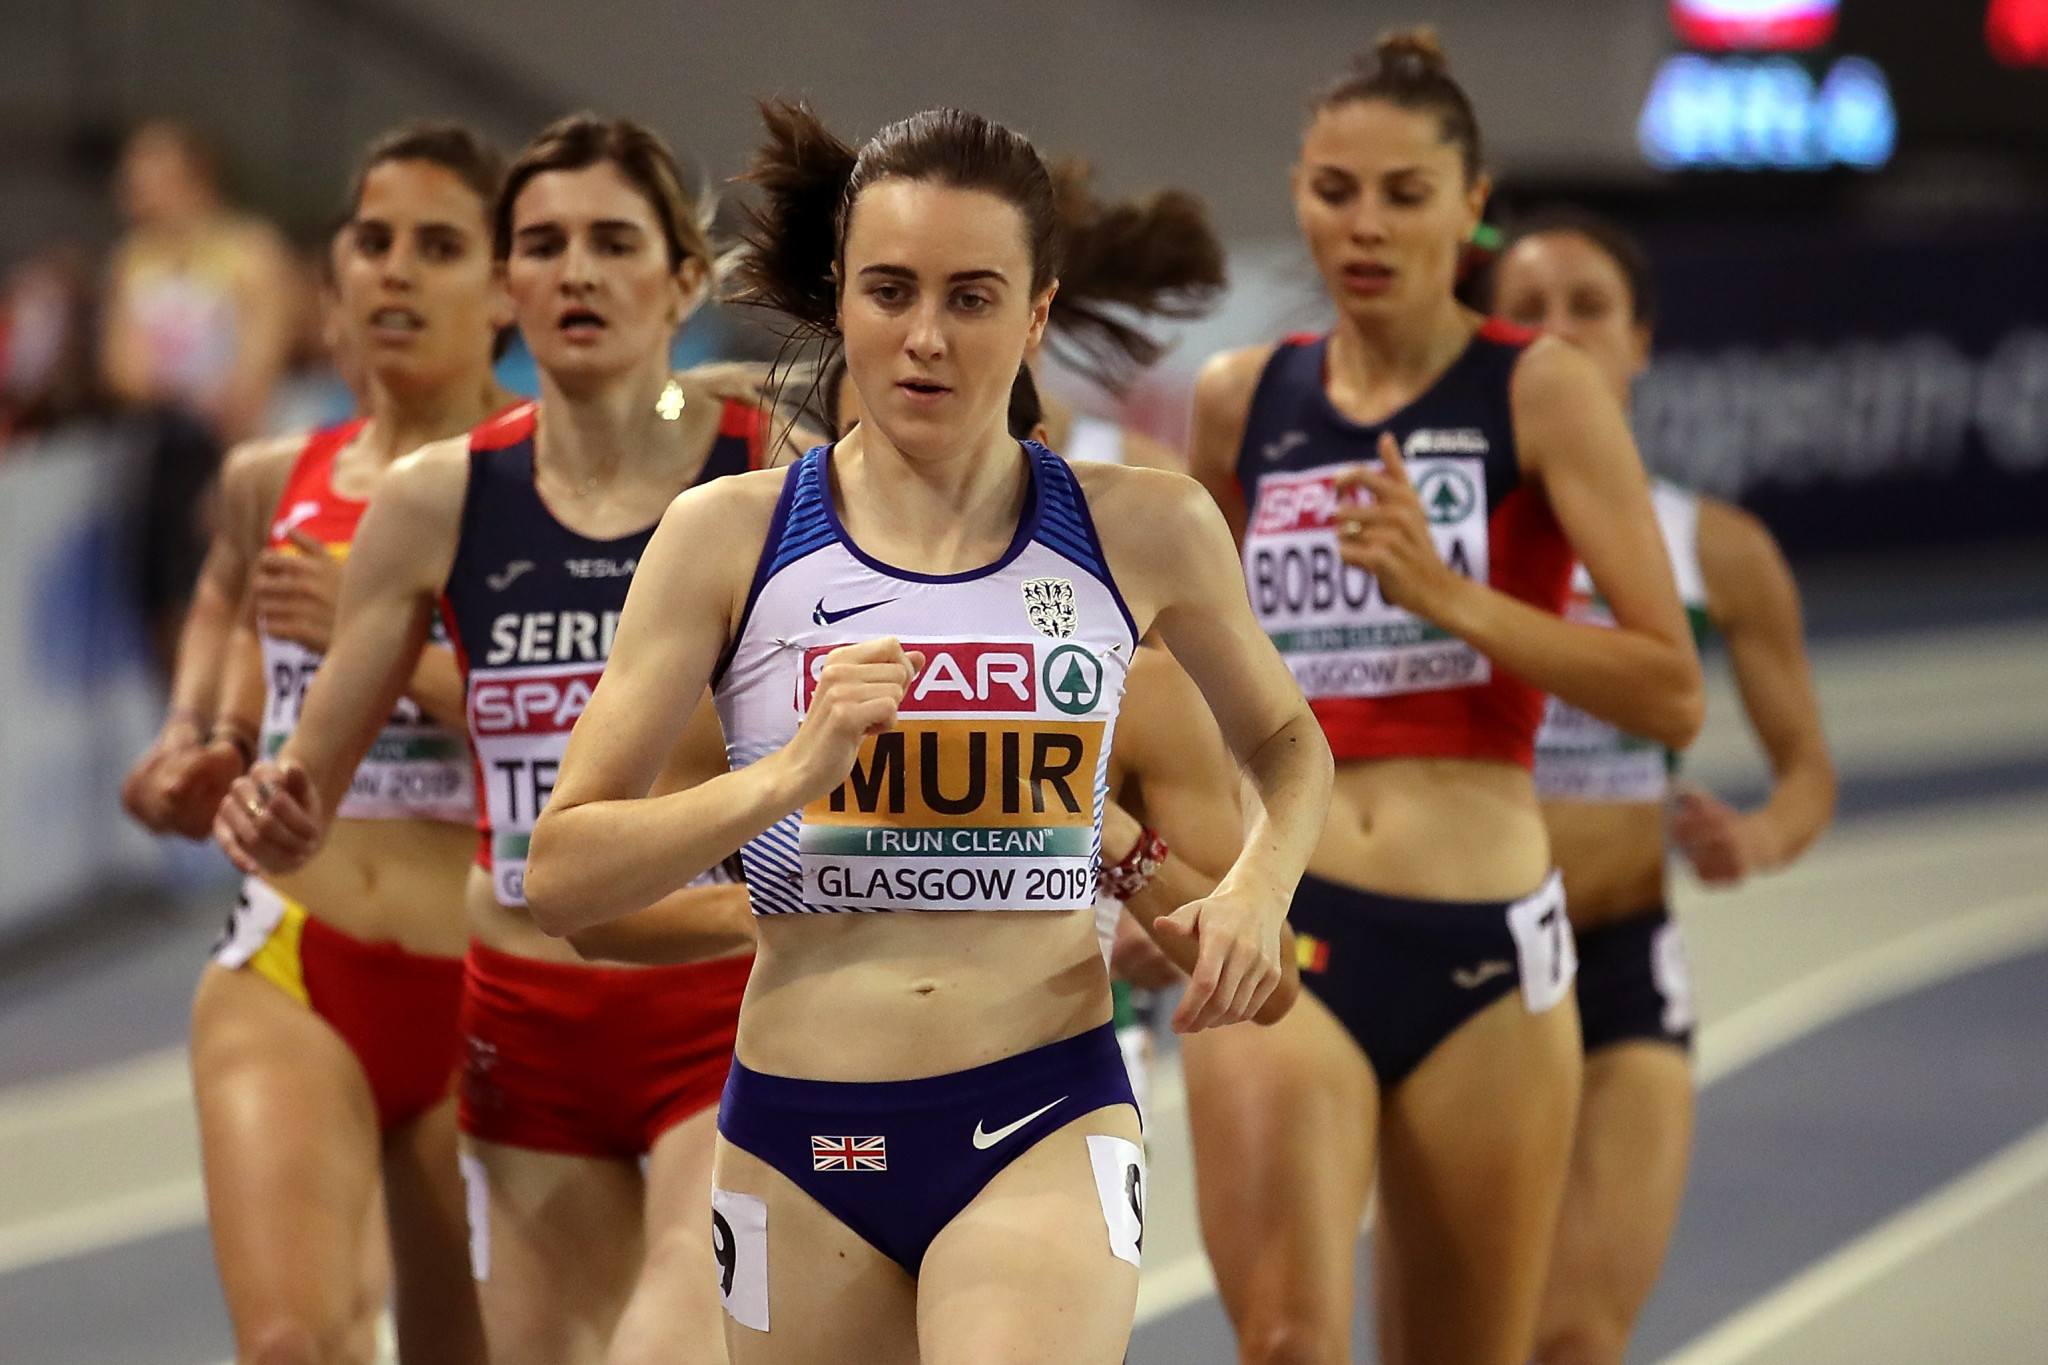 Home runner Laura Muir completed a second European Indoor double on home soil this evening over 1,500m ©Getty Images 